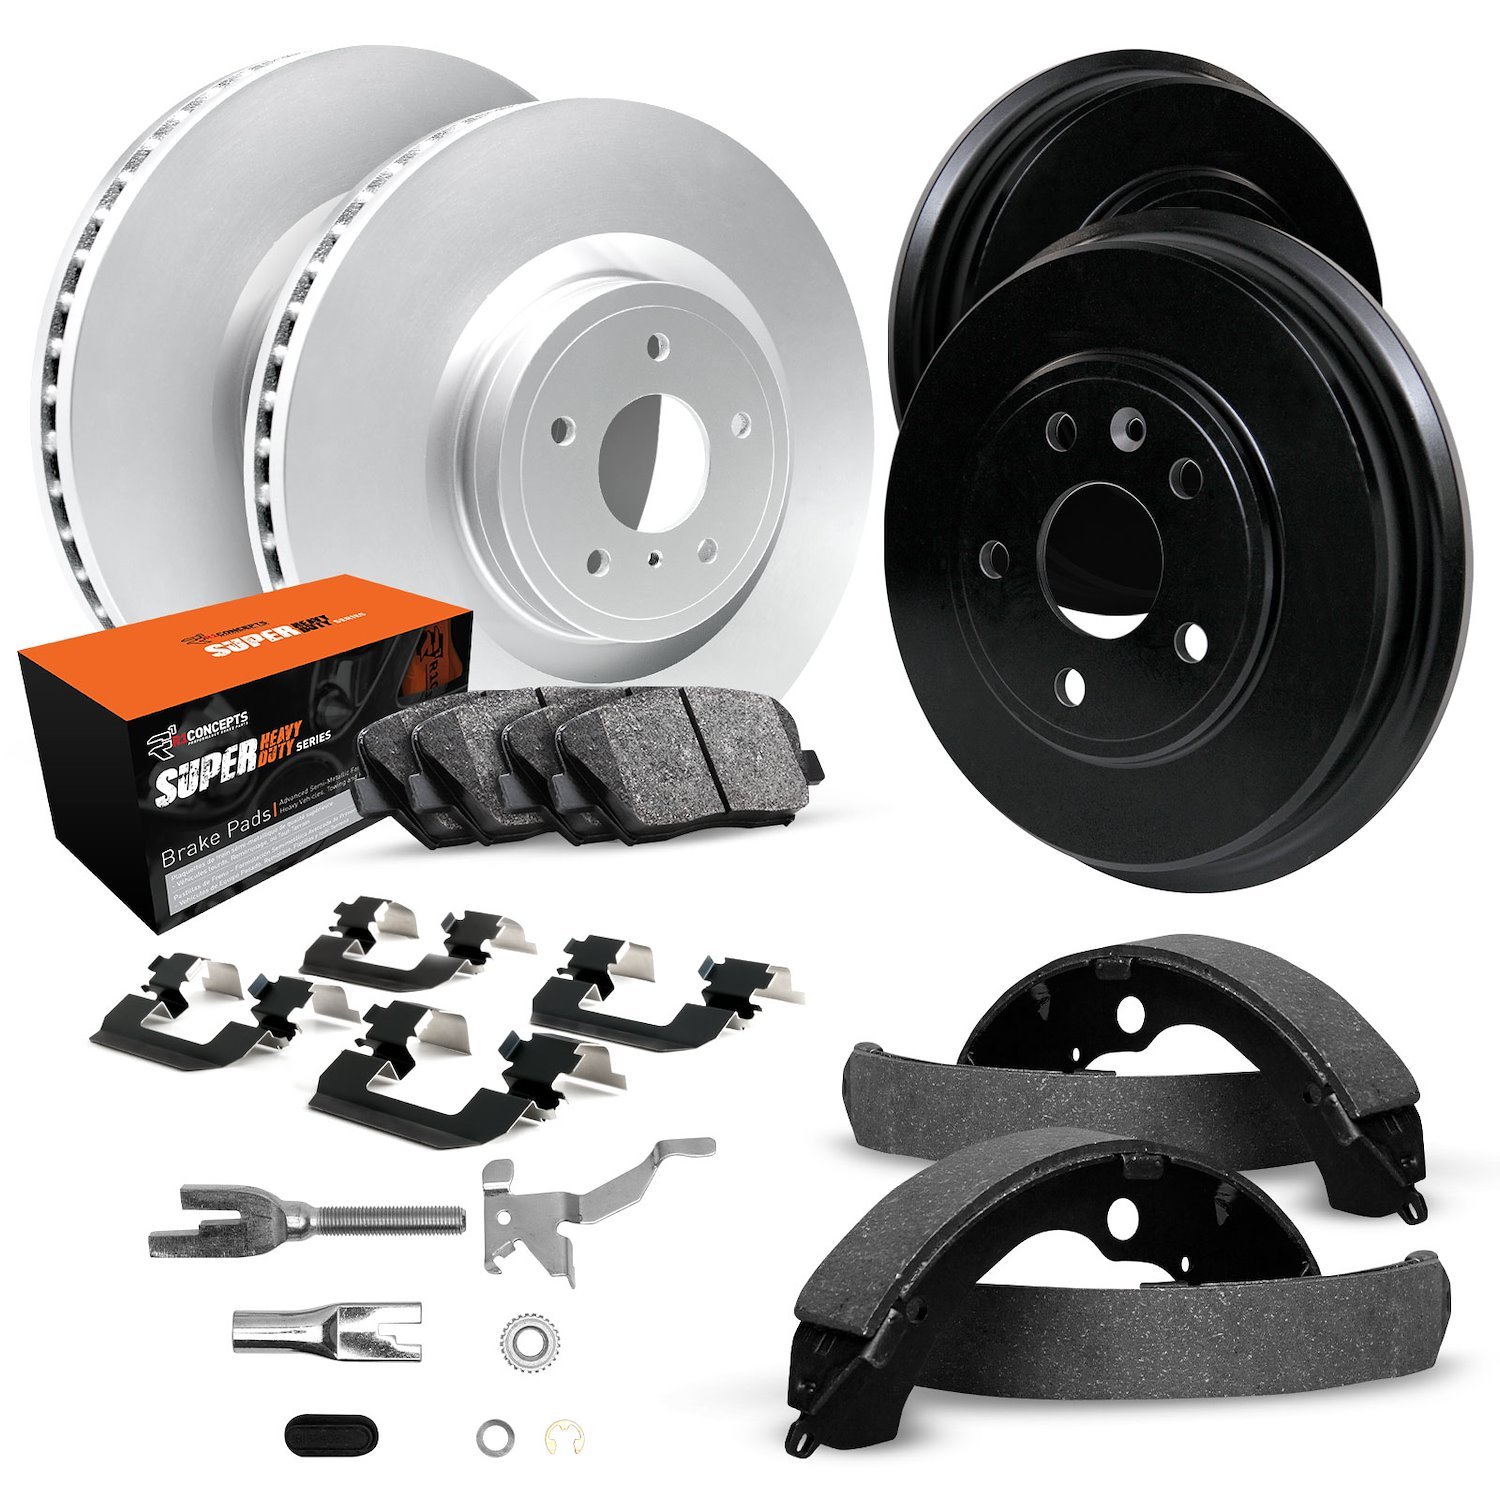 GEO-Carbon Brake Rotor & Drum Set w/Super-Duty Pads, Shoes, Hardware/Adjusters, 1988-1999 GM, Position: Front & Rear